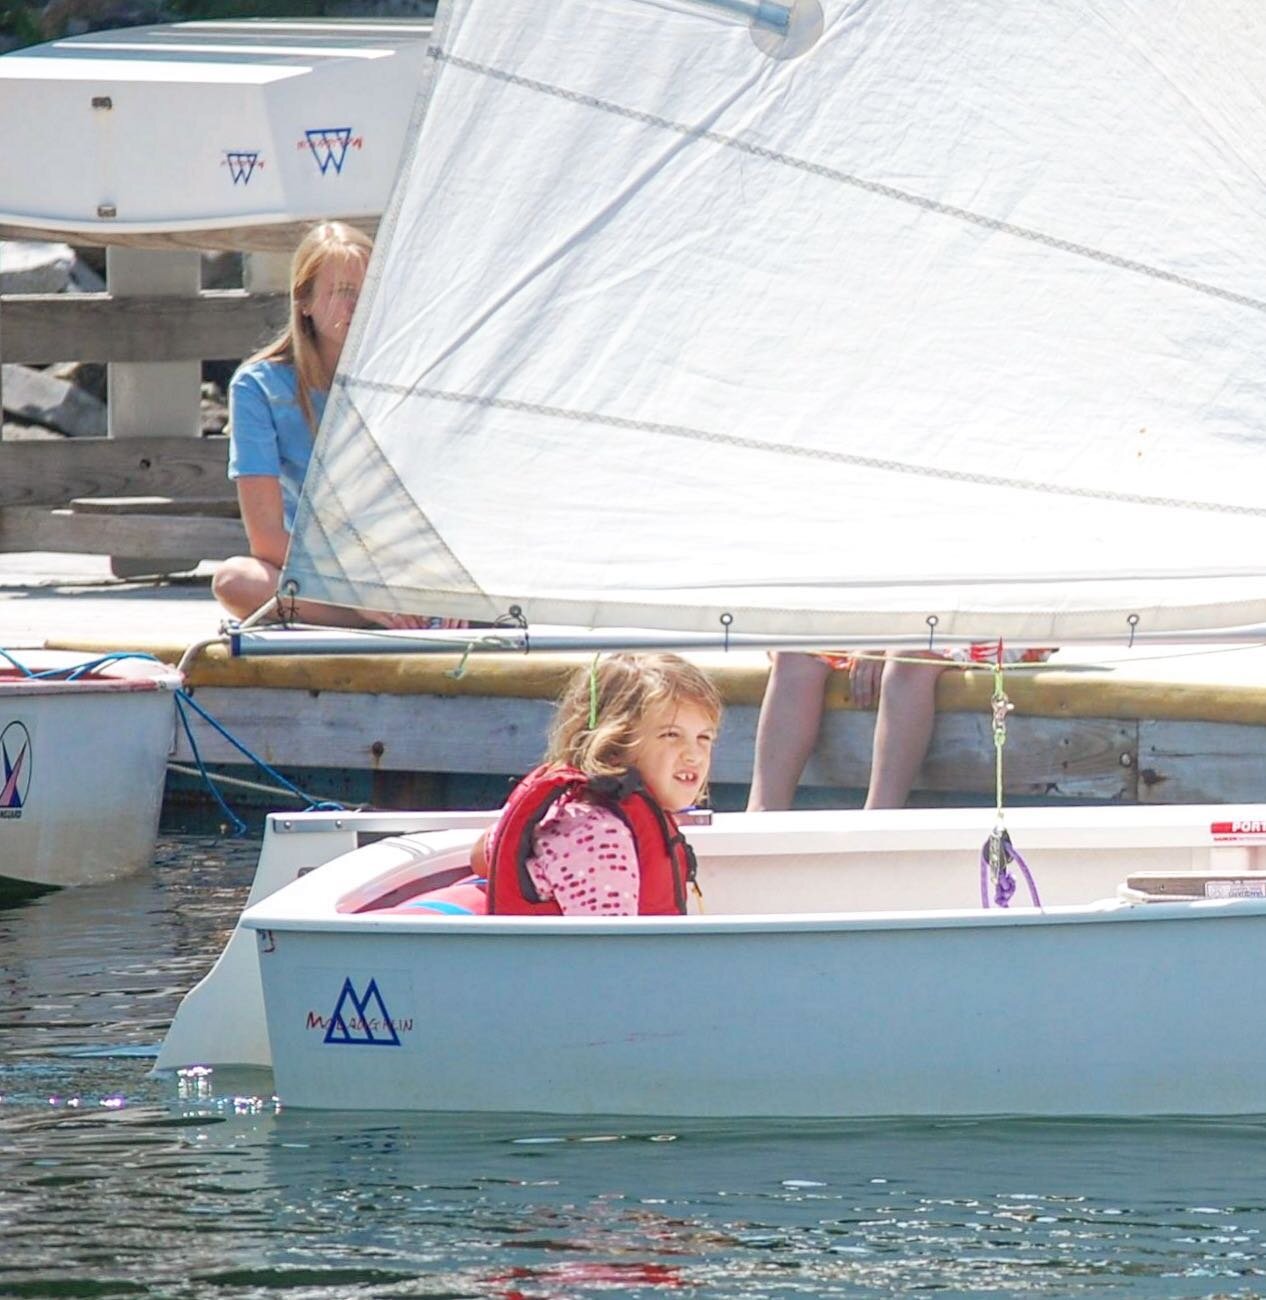 #tbt 2010 ⚡️ Back when Instructor Brin was in Opti A. #kseakids #kidswhosail #optisailing